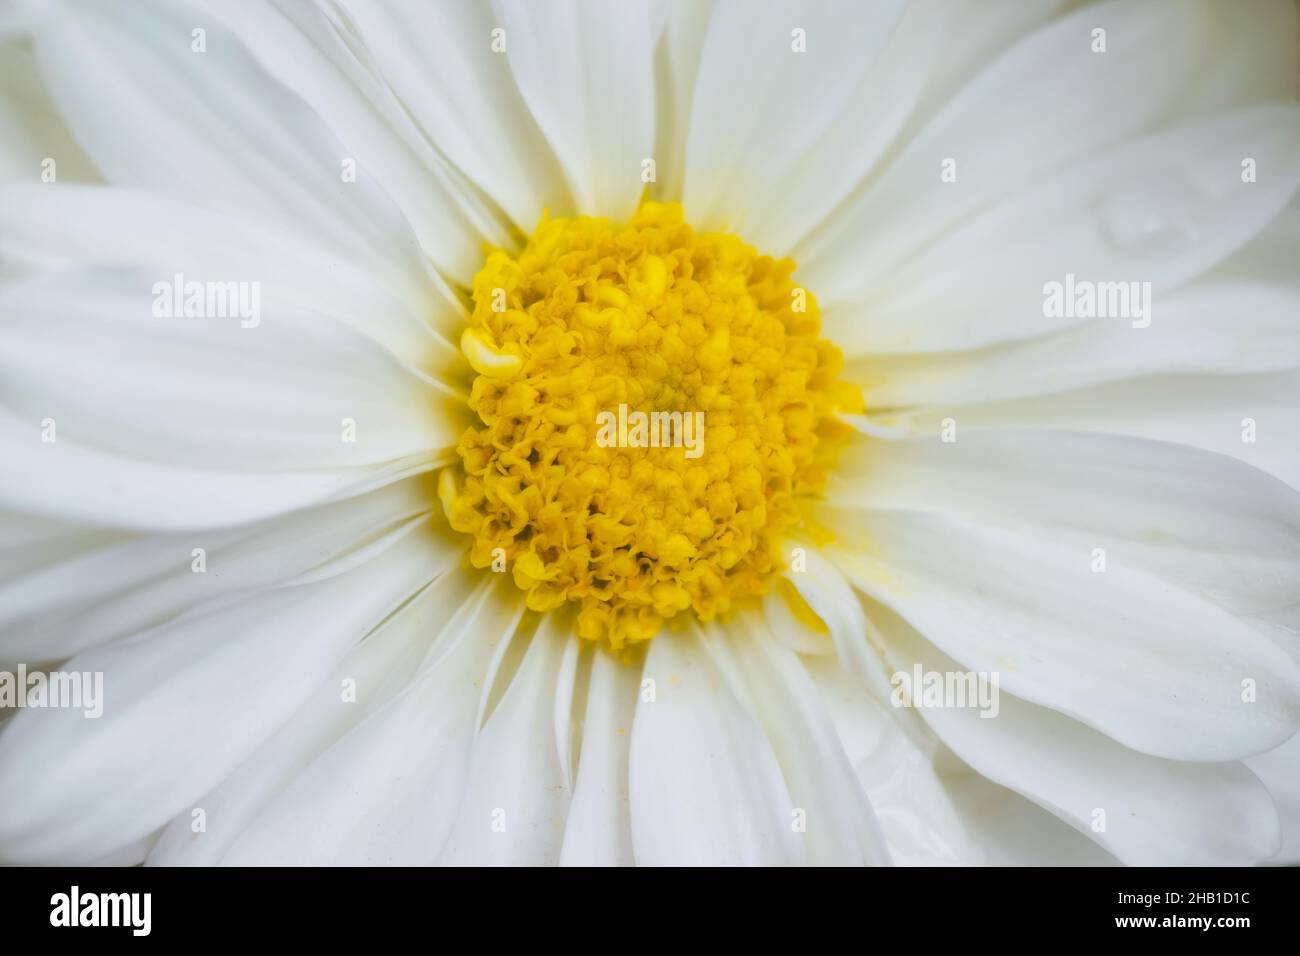 White Chrysanthemum close up photo. Details of petals with full frame image for background. Stock Photo